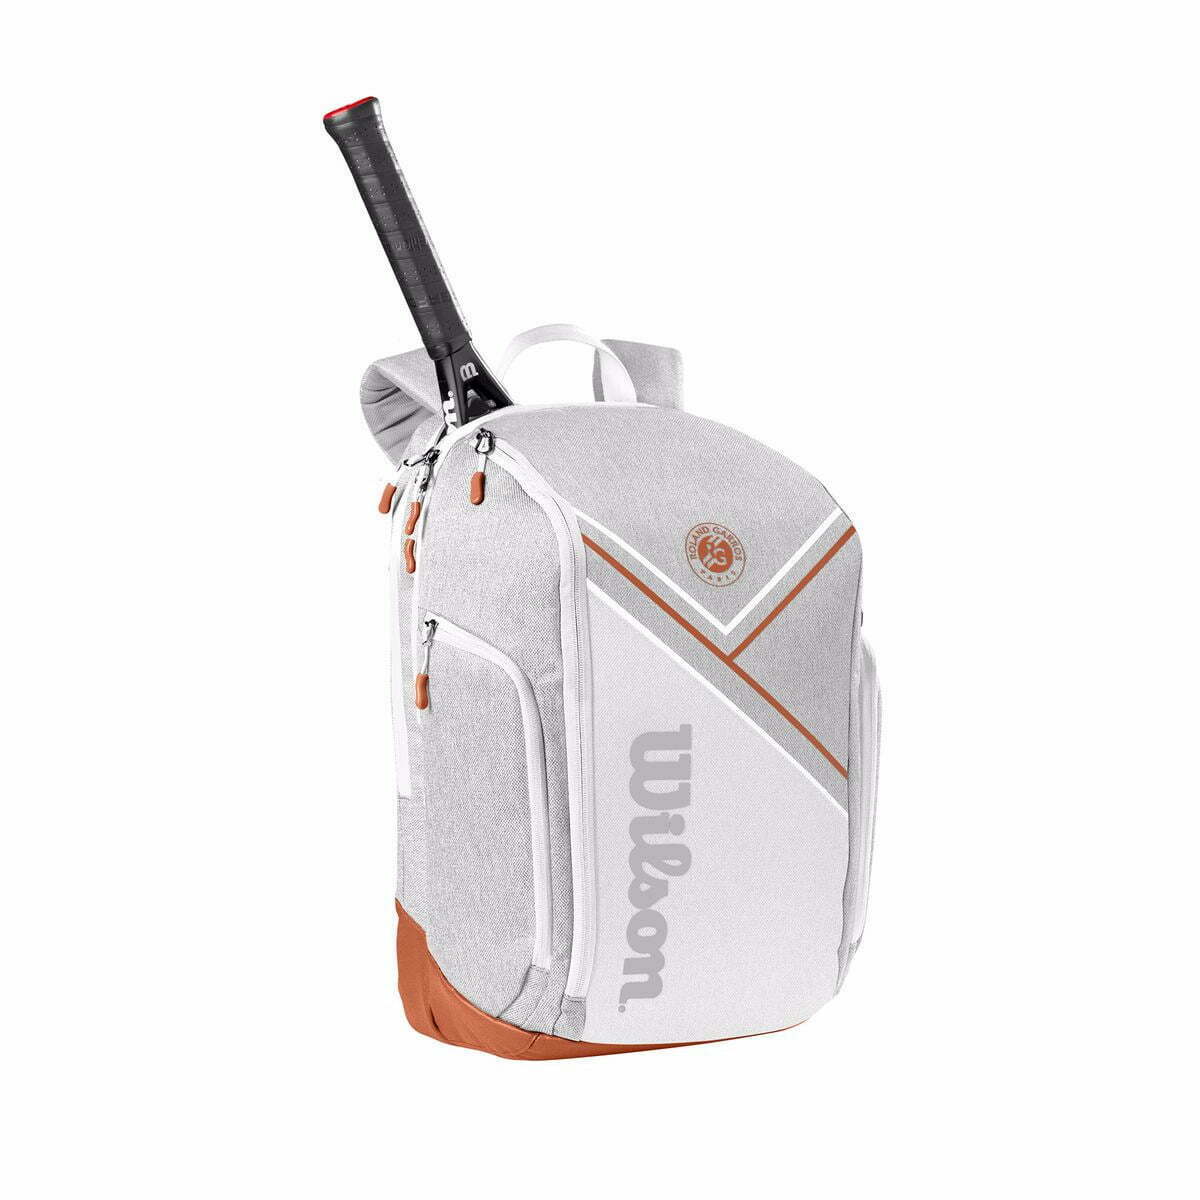 Wr8018302 1 Roland Garros Super Tour Backpack Clay Wh.png.high Res 1200x1200